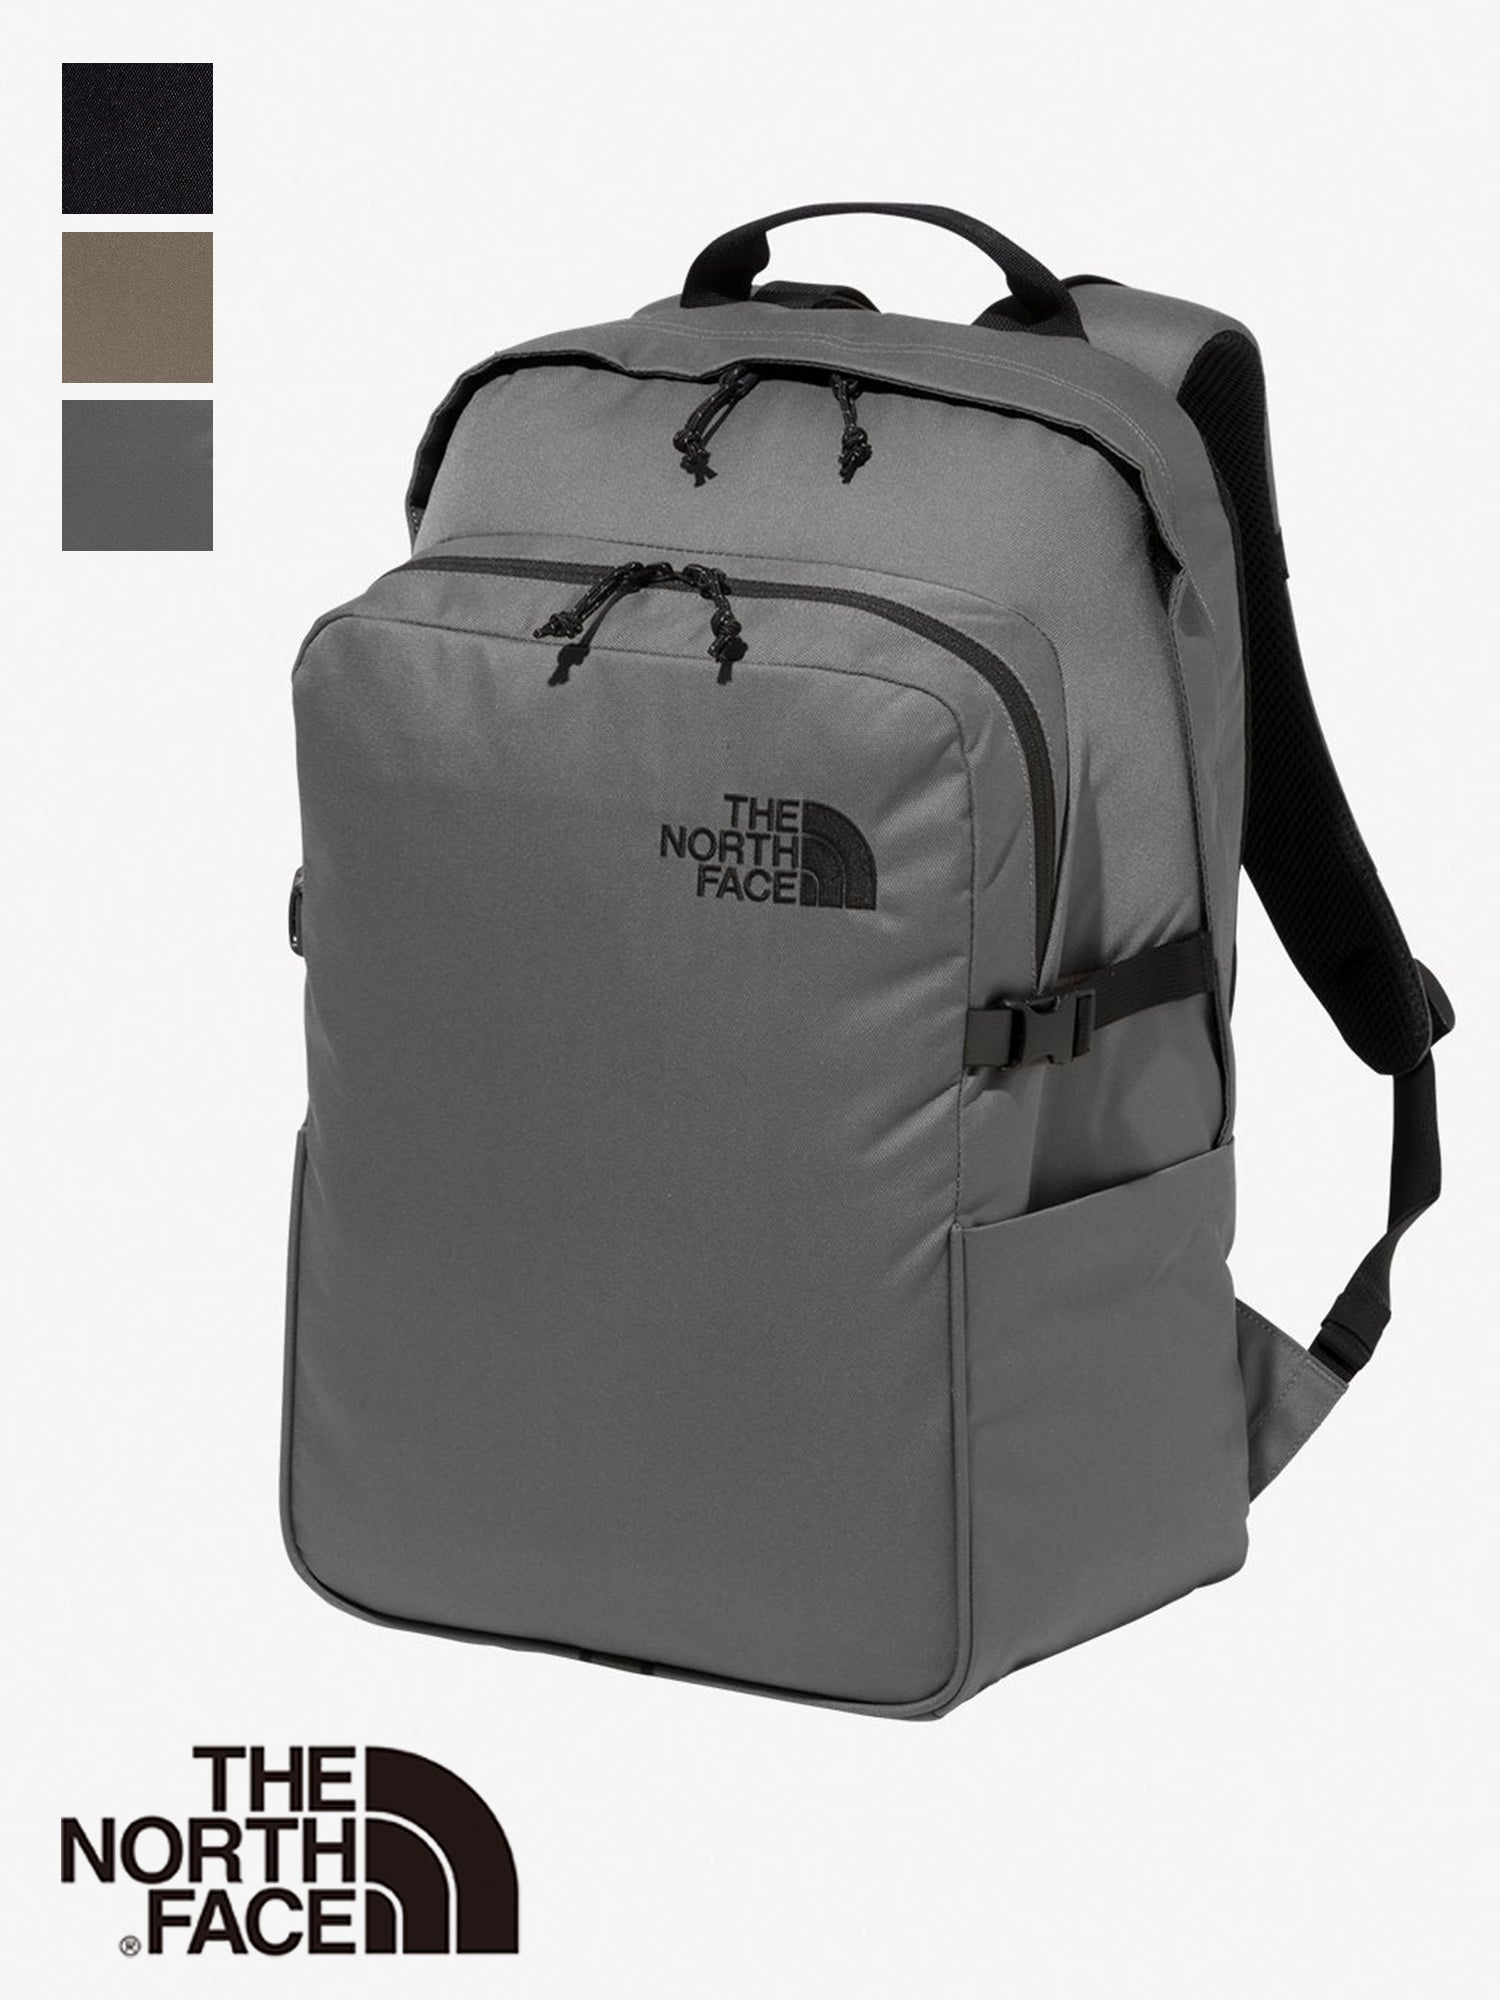 [THE NORTH FACE] Boulder Daypack The North Face Unisex 